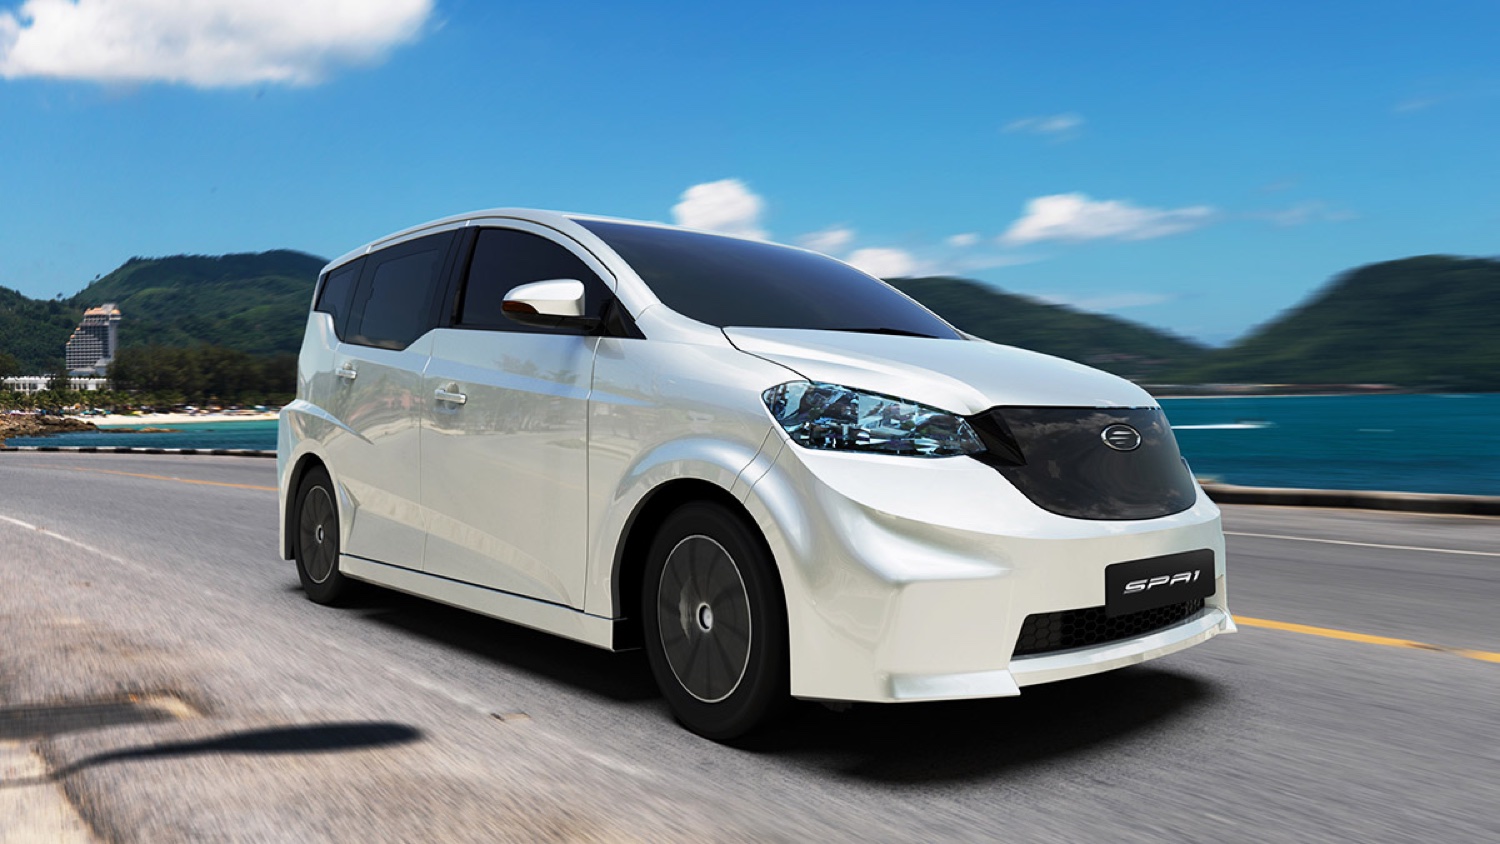 Mine Mobility's SPA1 EV looks to make its mark in Thailand